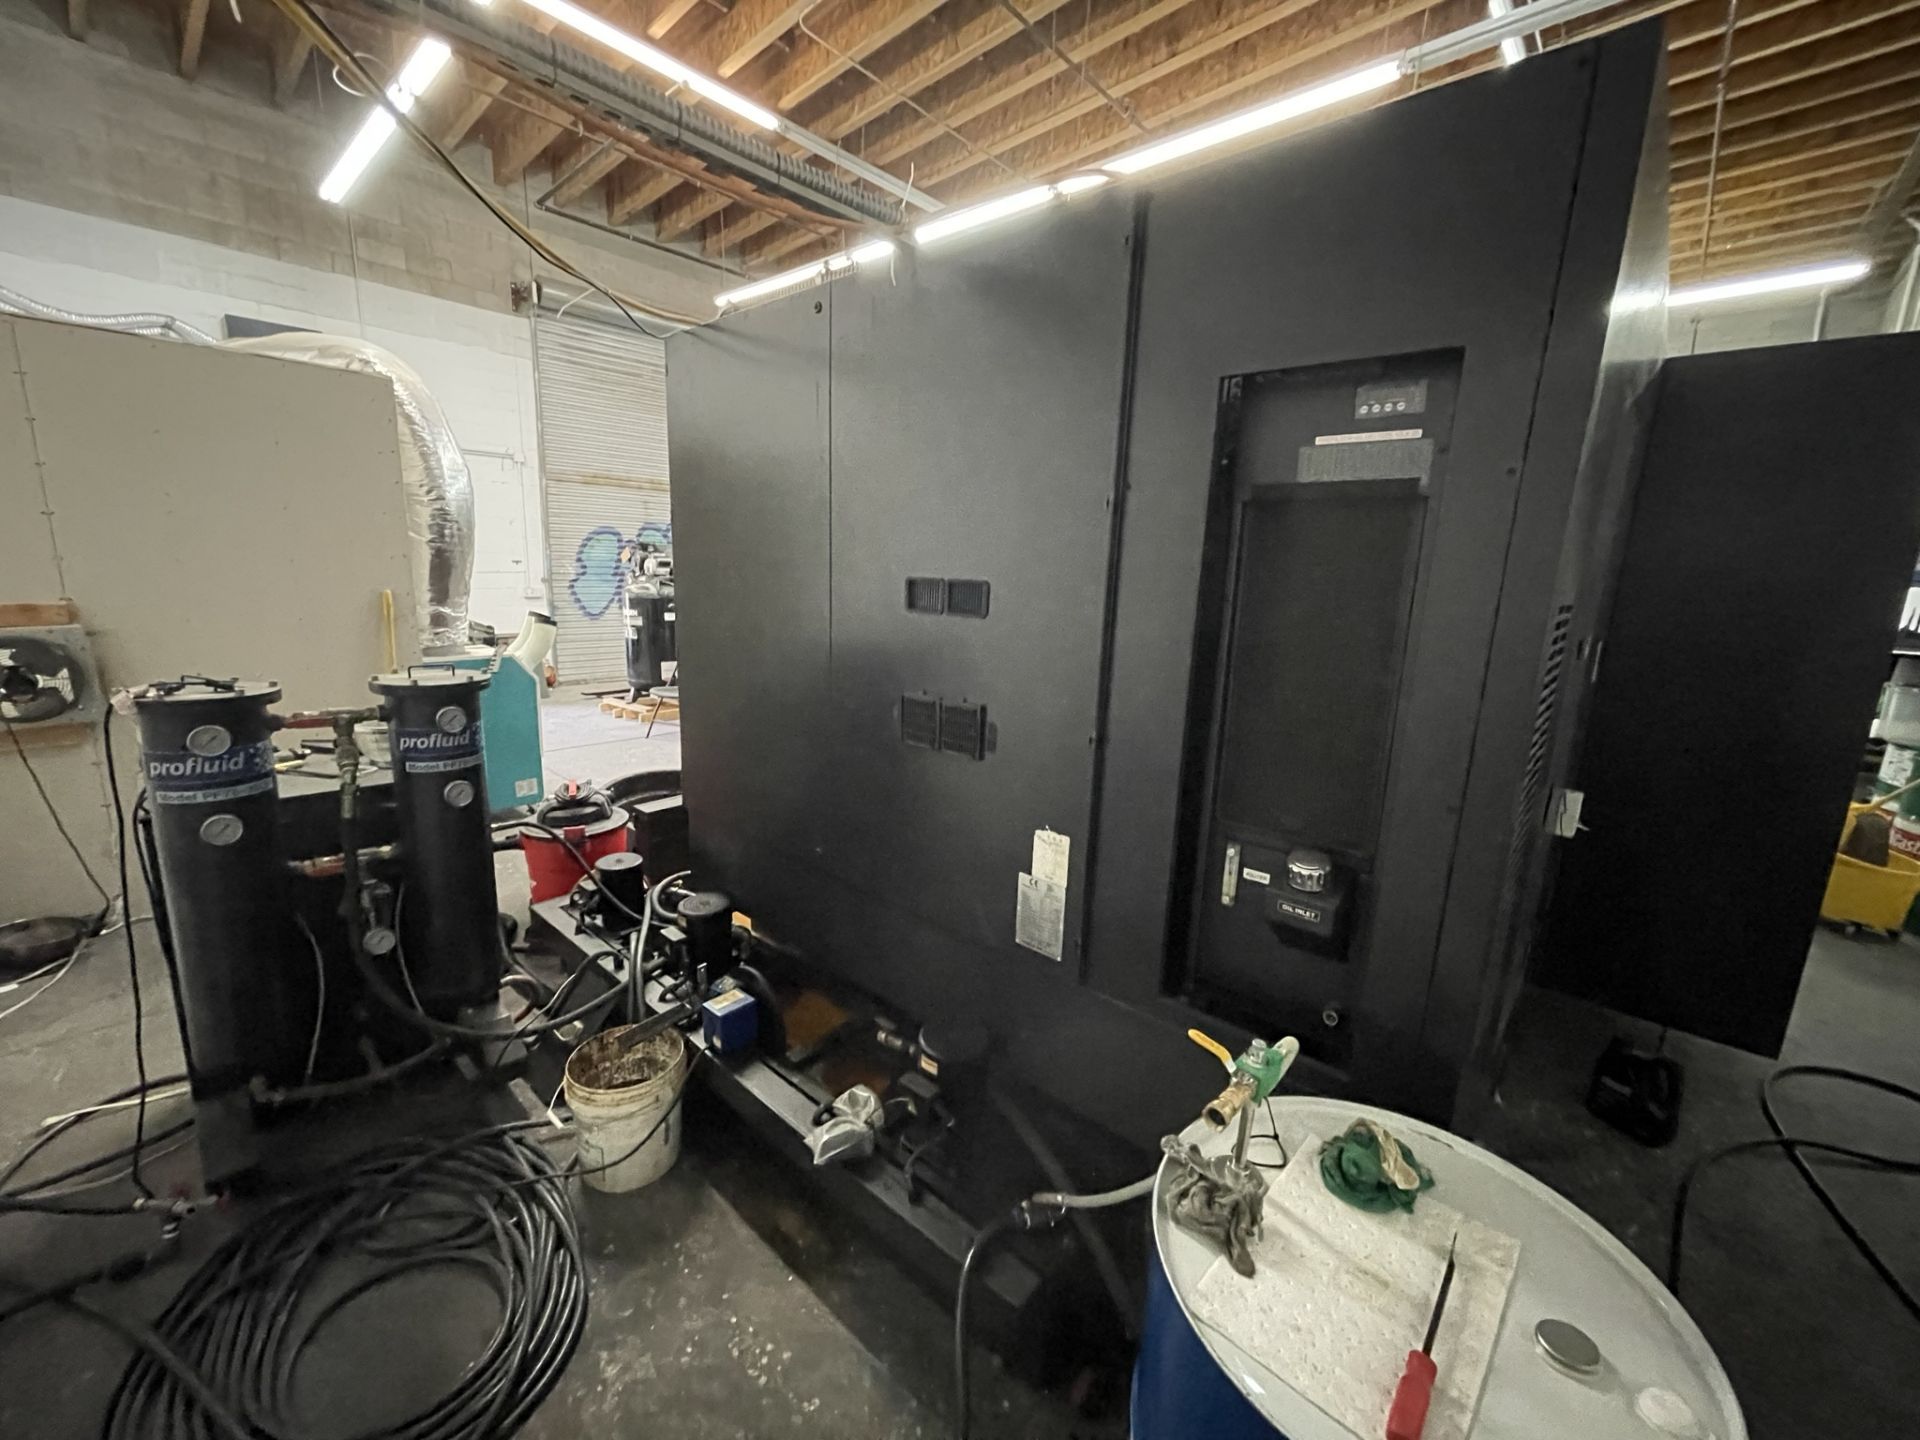 2013 Hyundai WIA HS4000i 4-Axis Horizontal Machining Center with Pallet Changer *1643 Cutting Hours* - Image 23 of 25